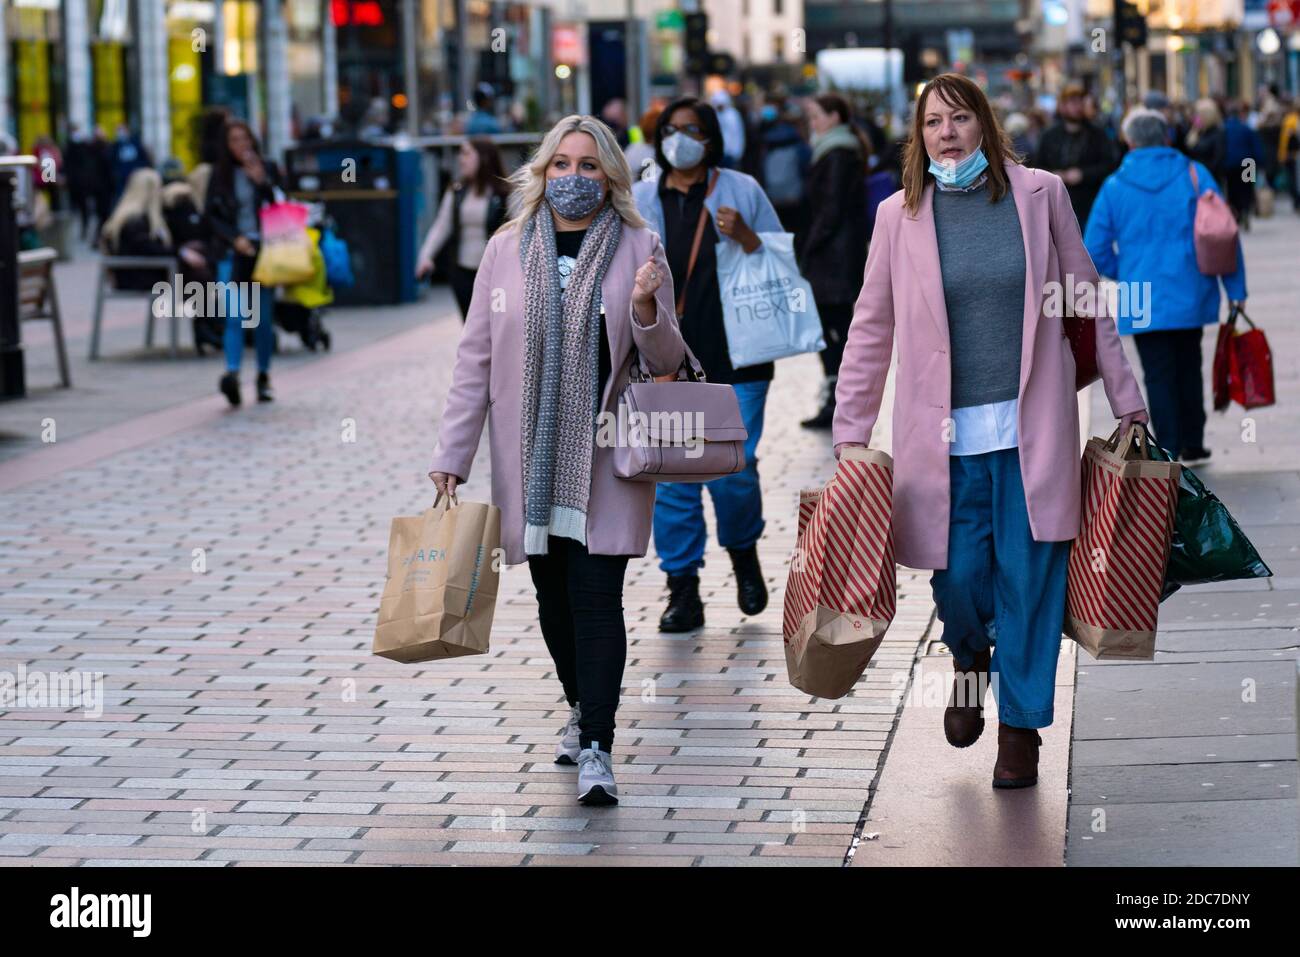 Glasgow, Scotland, UK. 19 November 2020. On the day before the highest level 4 lockdown is imposed on west and central Scotland, shops in Glasgow city centre and streets are busy with members of the public. Pictured; Women shopping on Argyle Street.  Iain Masterton/Alamy Live News Stock Photo